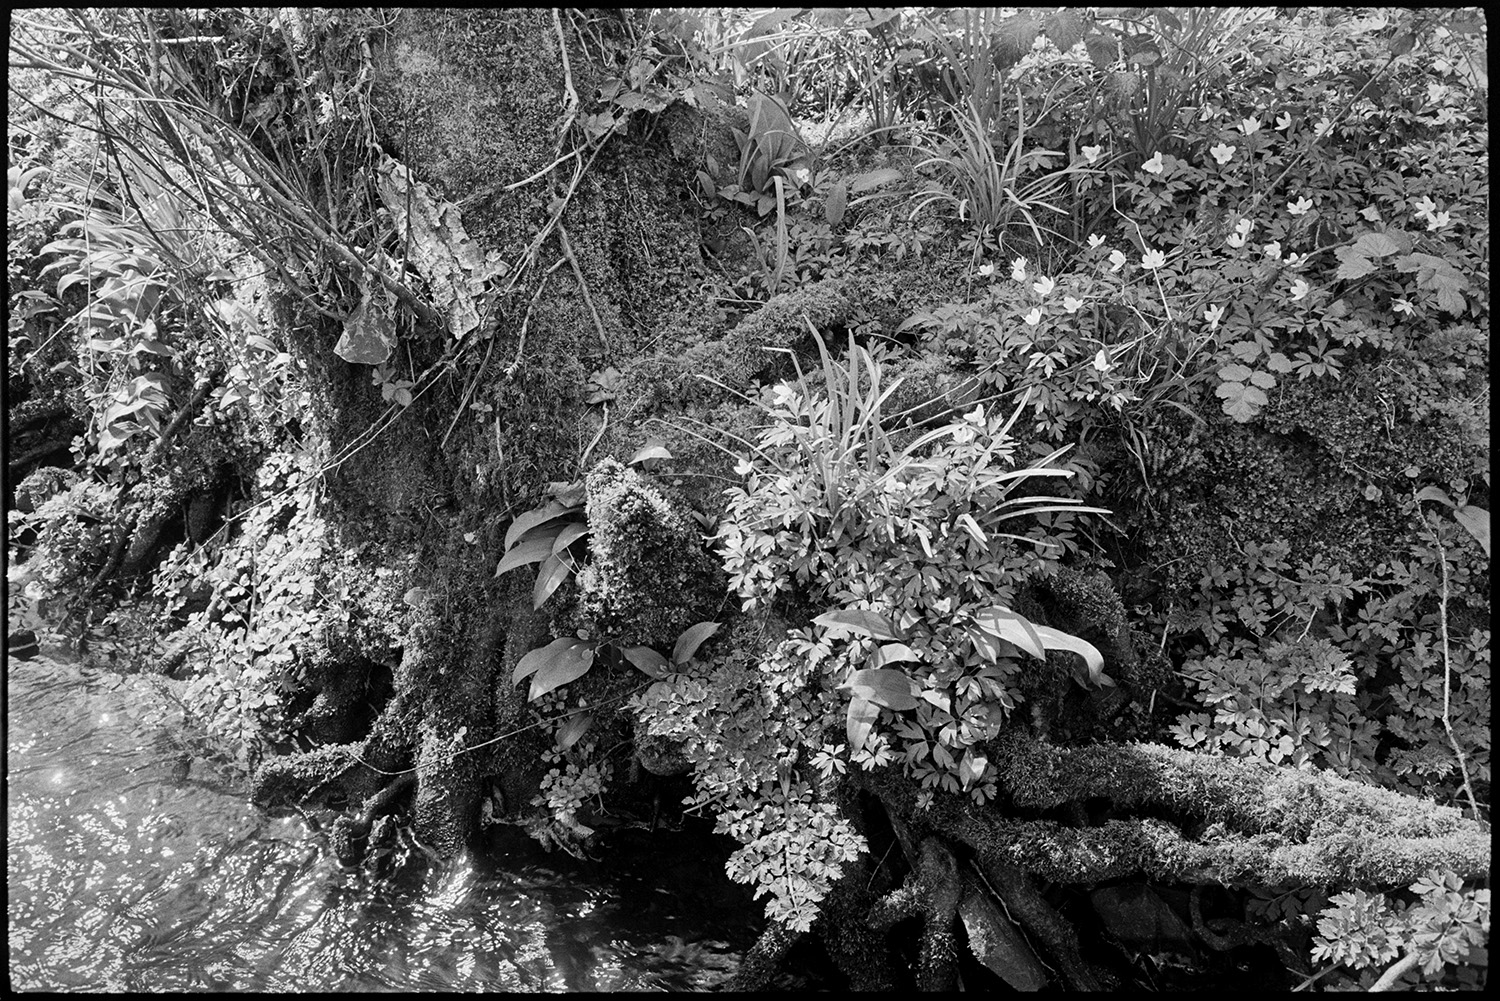 Flowers and leaves beside stream. 
[Flowers and moss covered tree branches growing on the banks of a stream near Addisford, Dolton.]